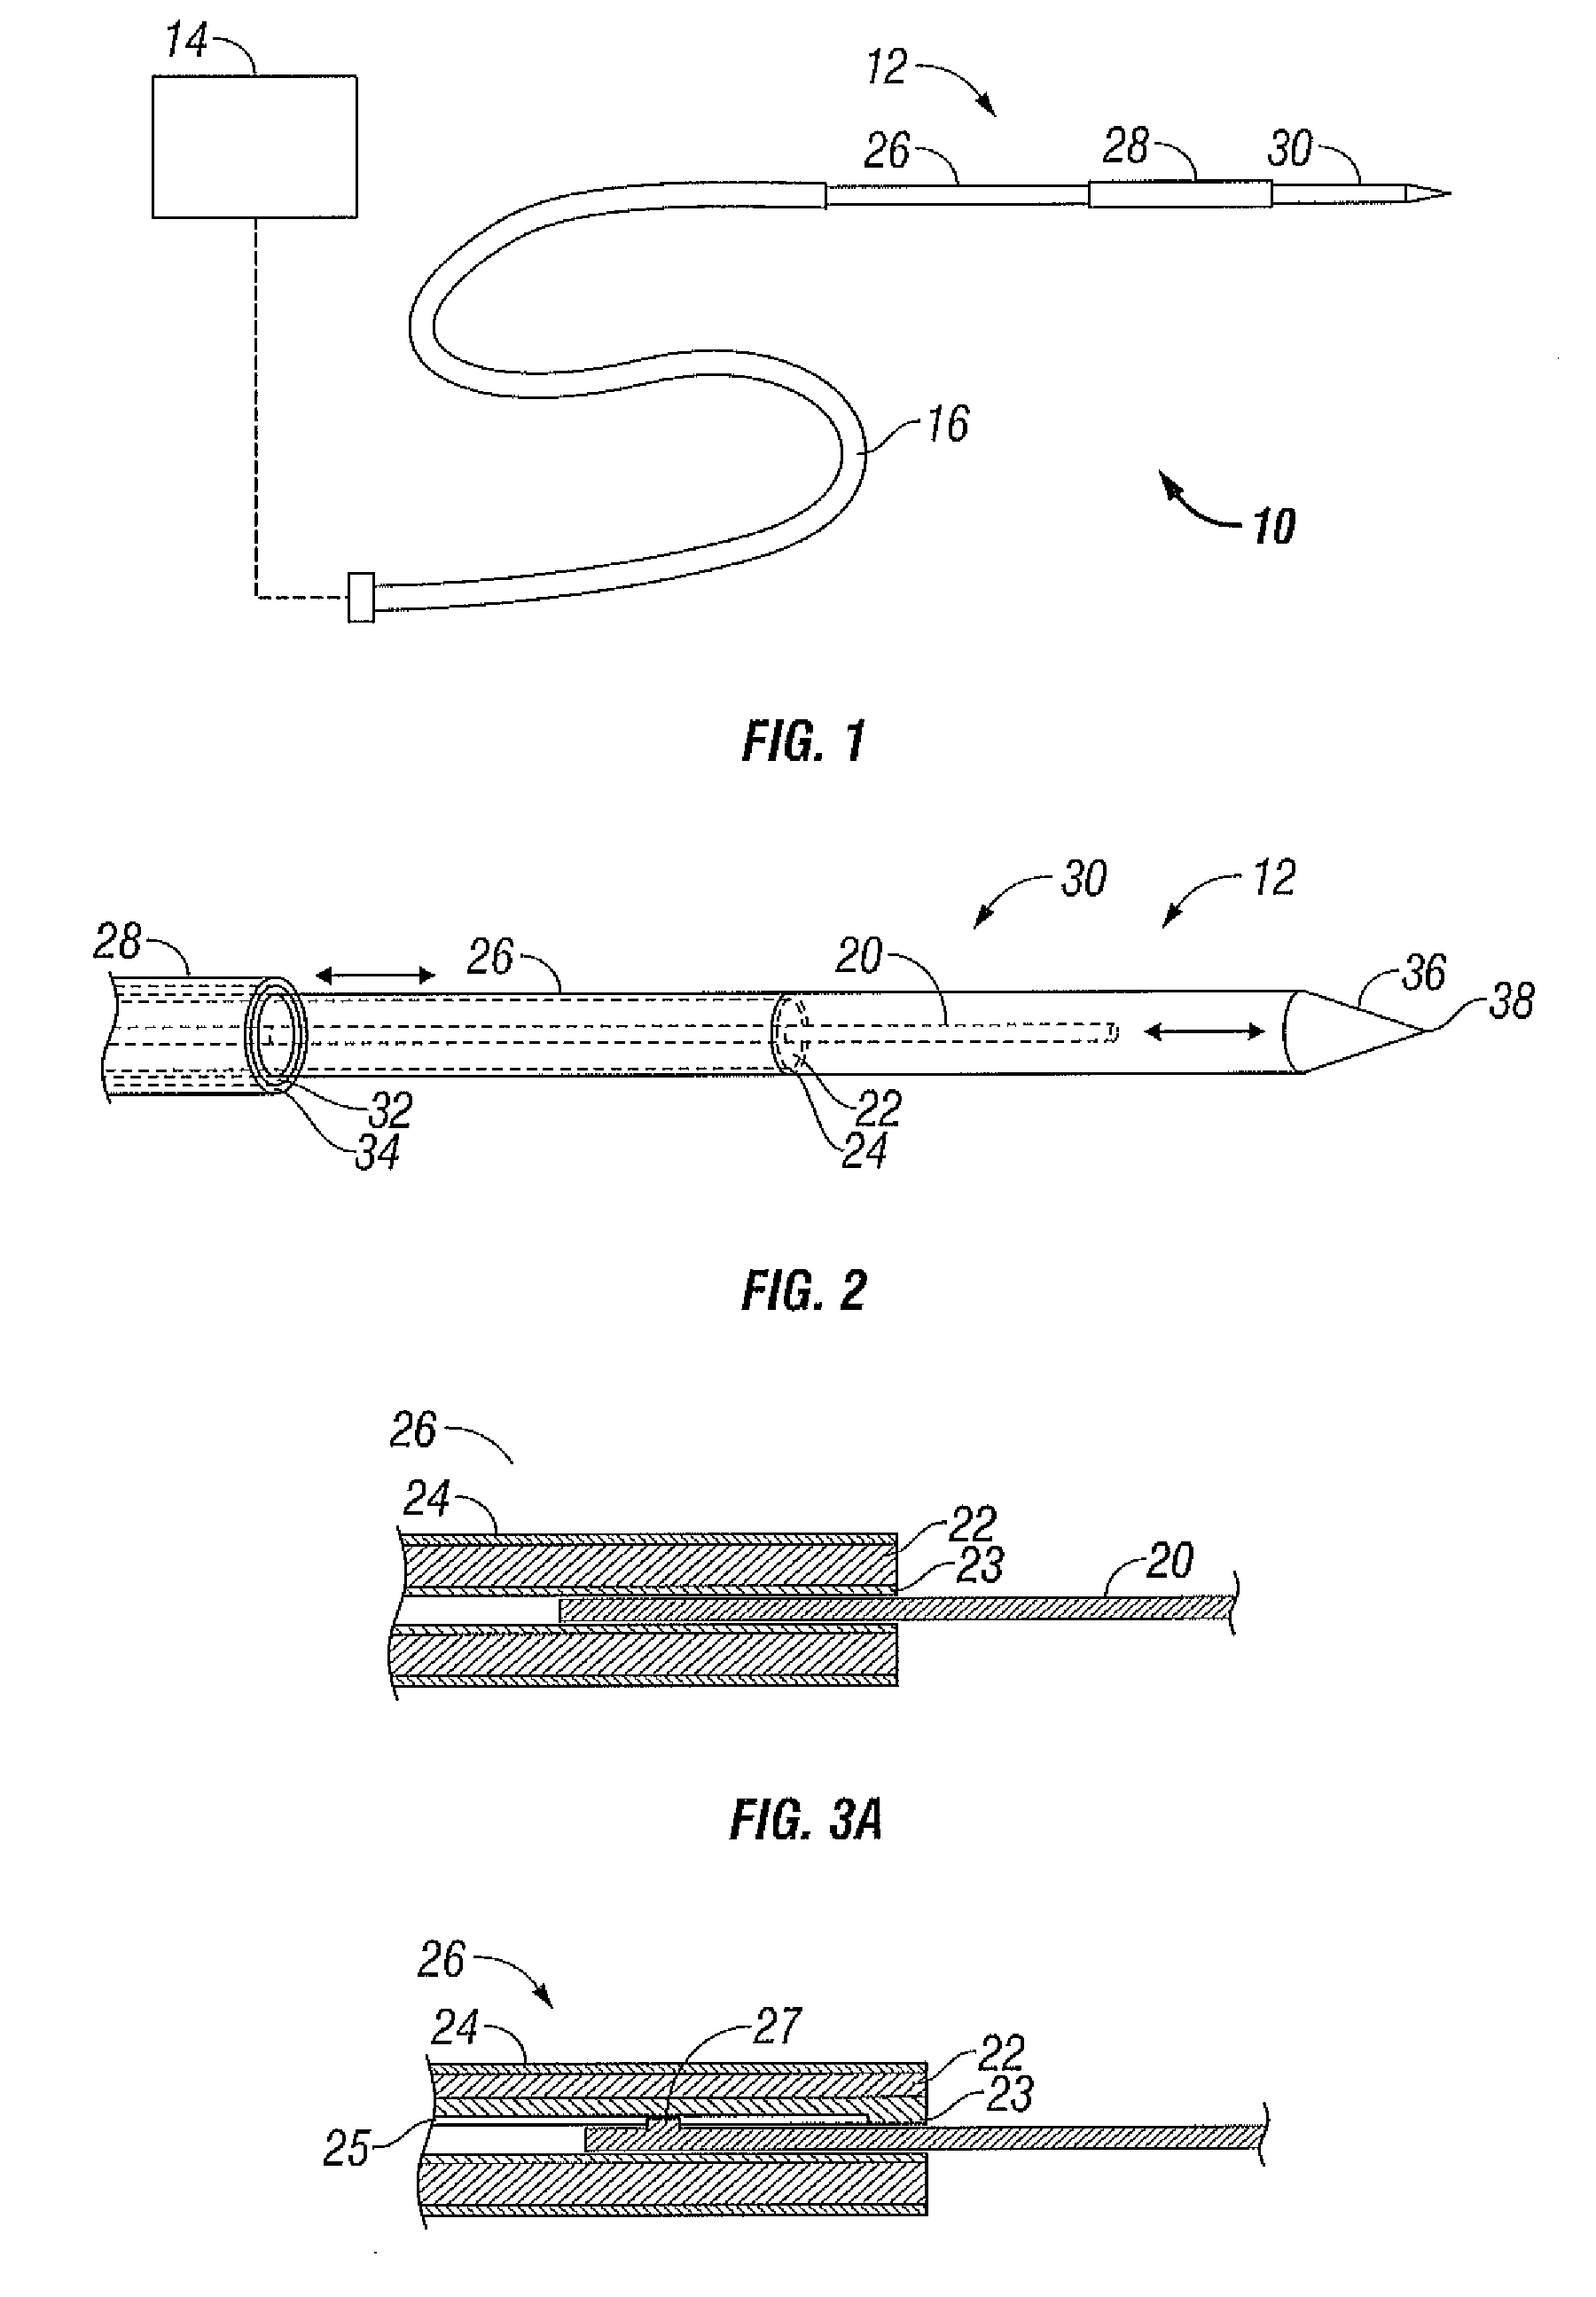 Dynamically Matched Microwave Antenna for Tissue Ablation